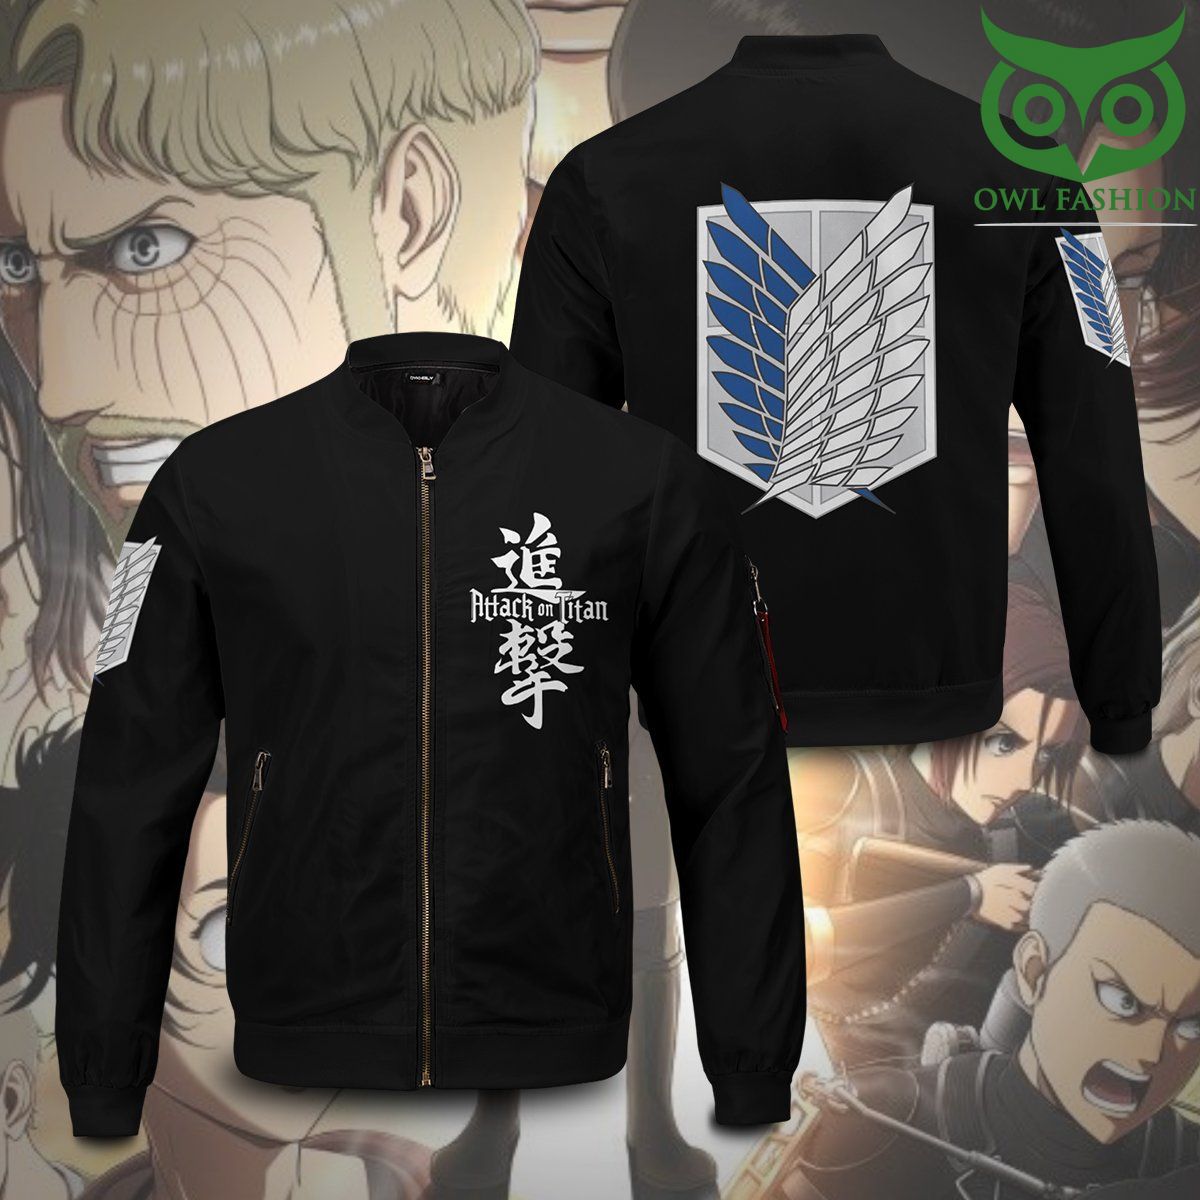 448 Attack on Titan Printed Bomber Jacket for fans